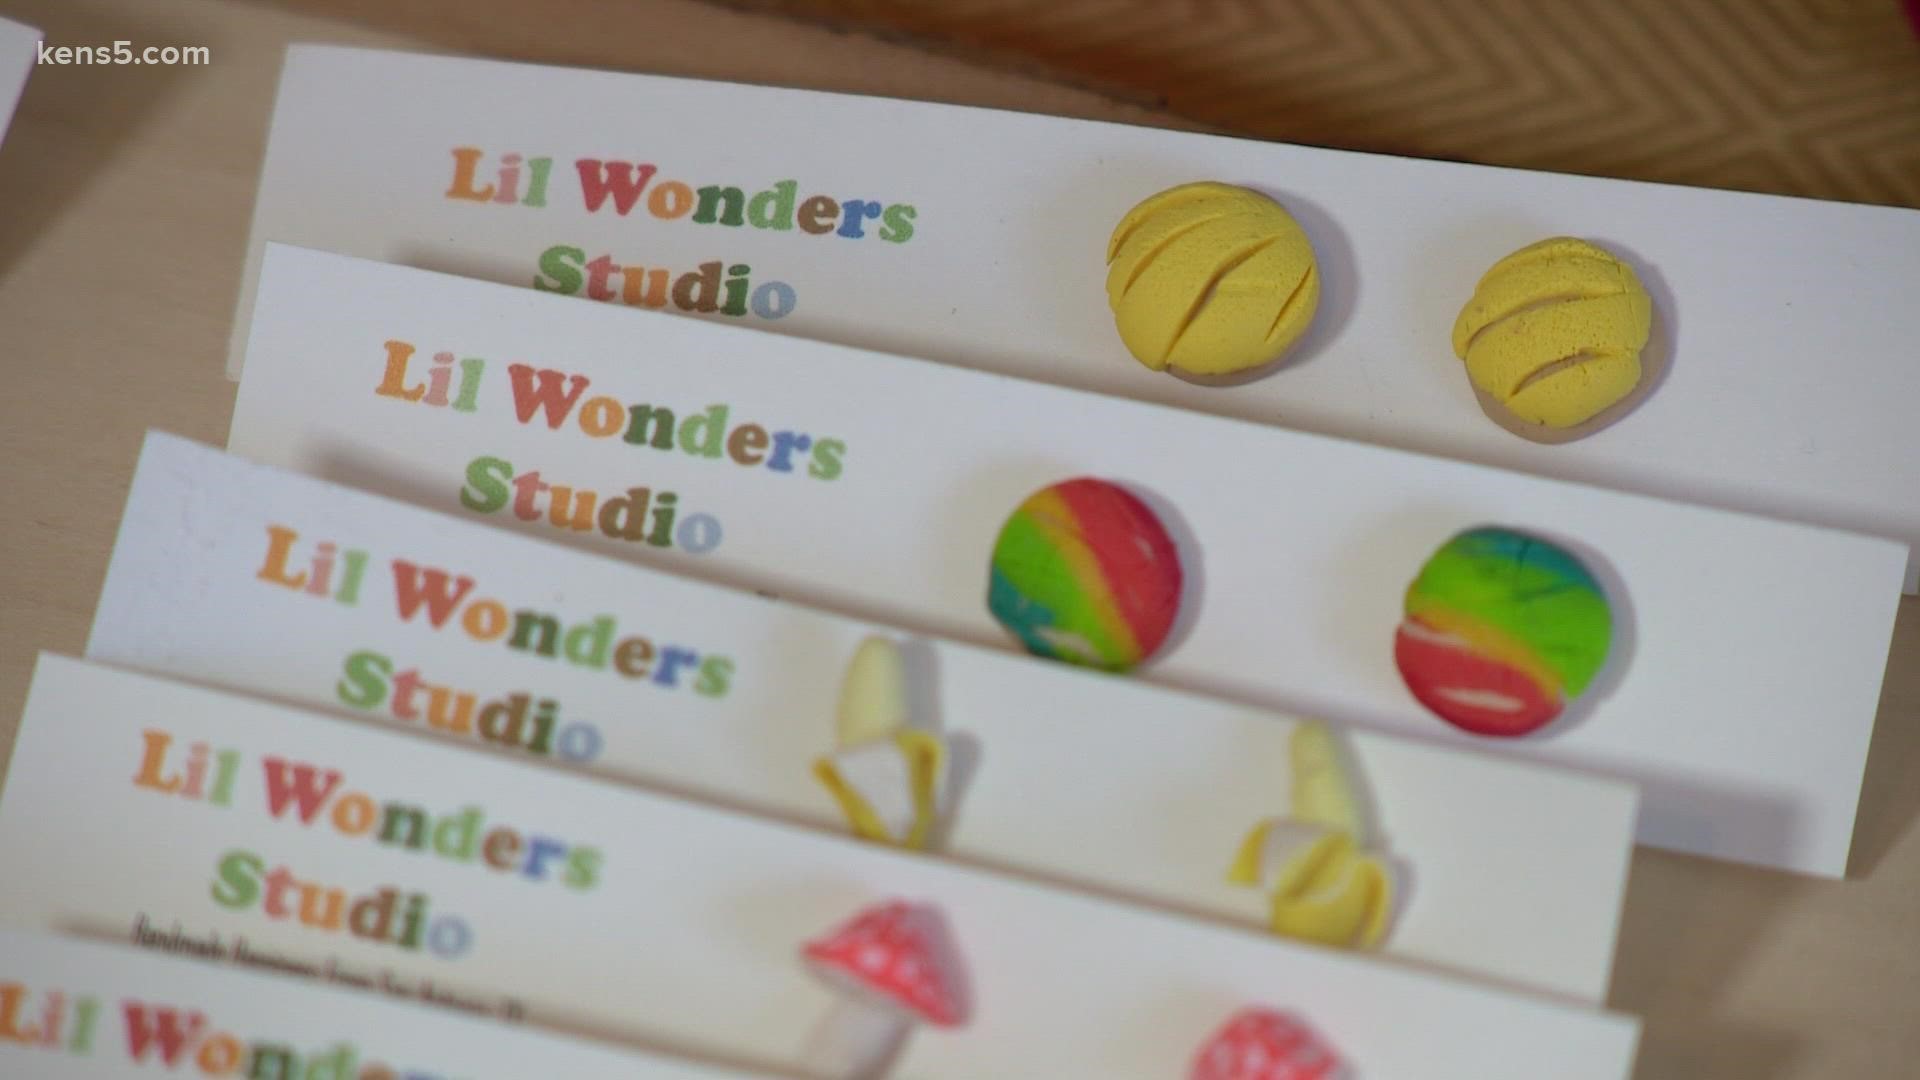 Madison Ossont said she created Lil Wonders Studio because she loves making things people love. From animal earrings to bowtie pasta ones, she's always designing.